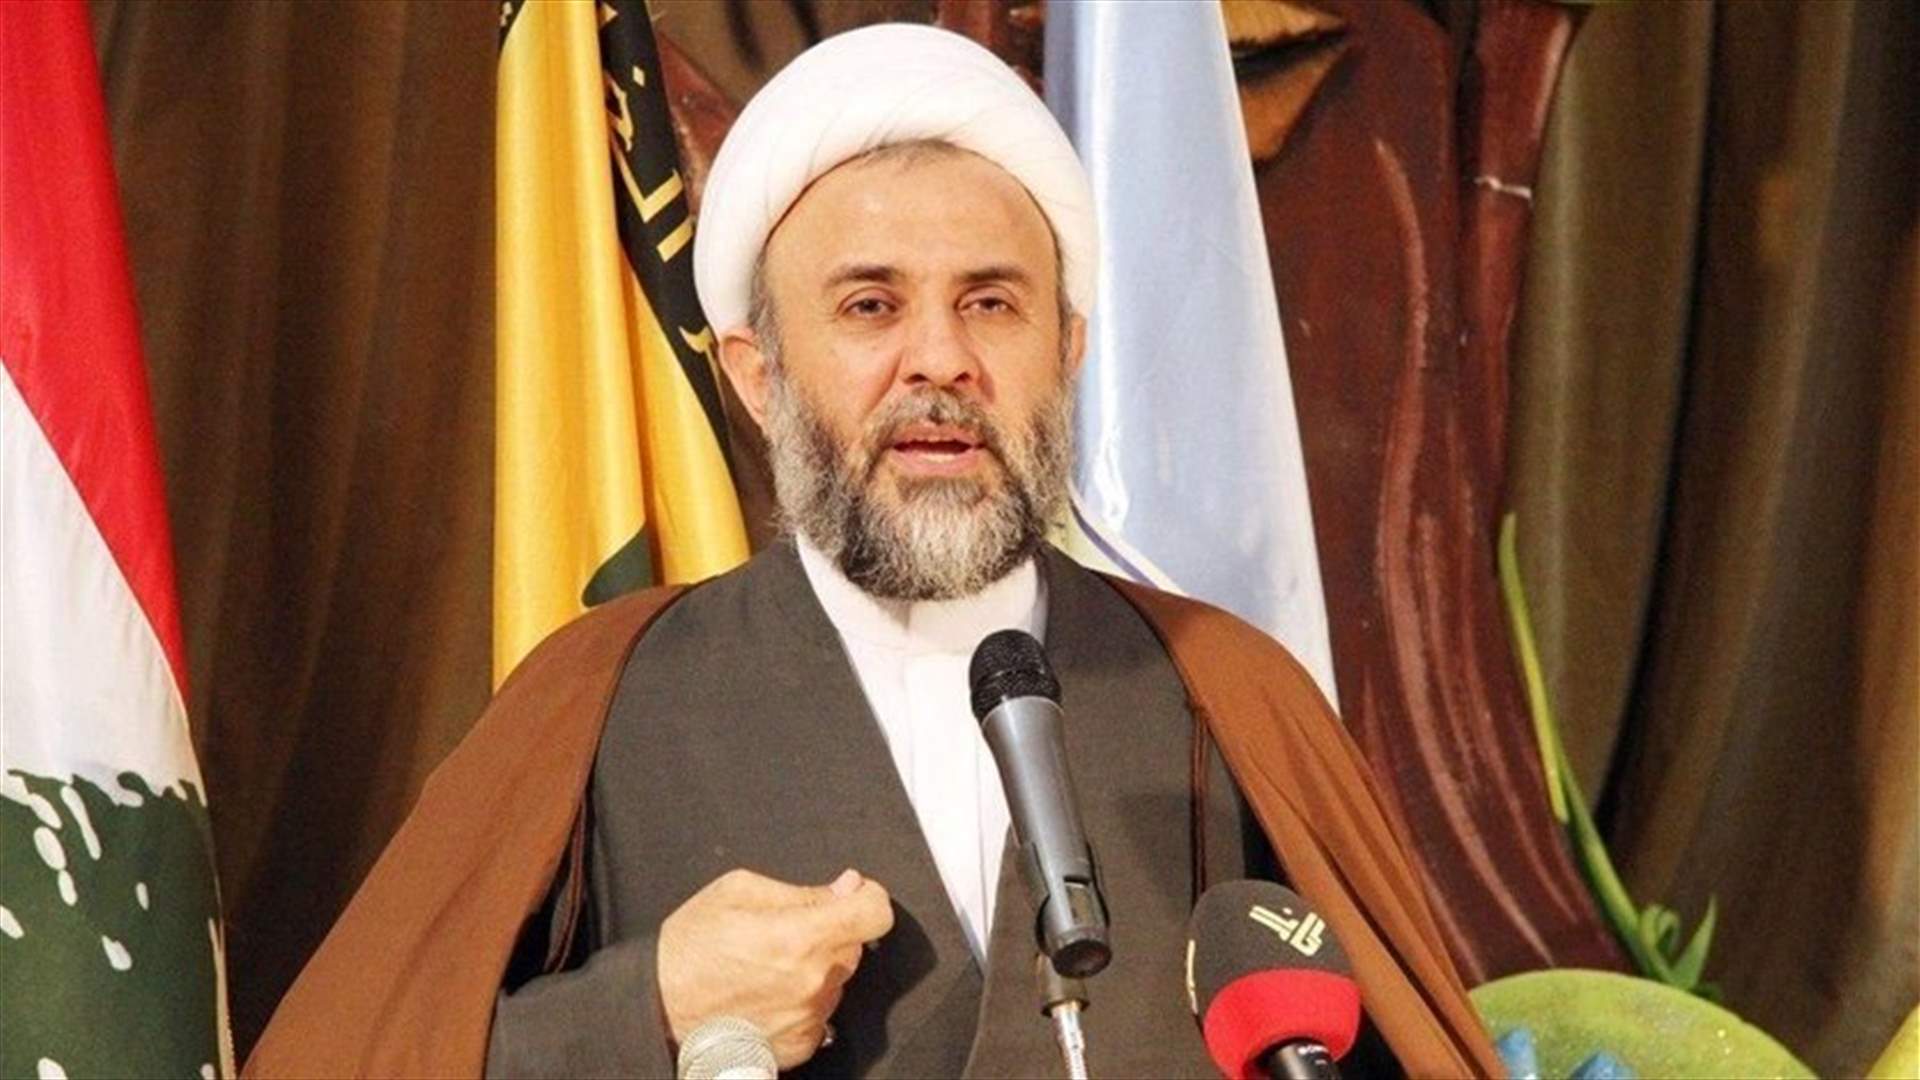 Sheikh Qaouq: Hezbollah will not allow new taxes to be imposed on the poor